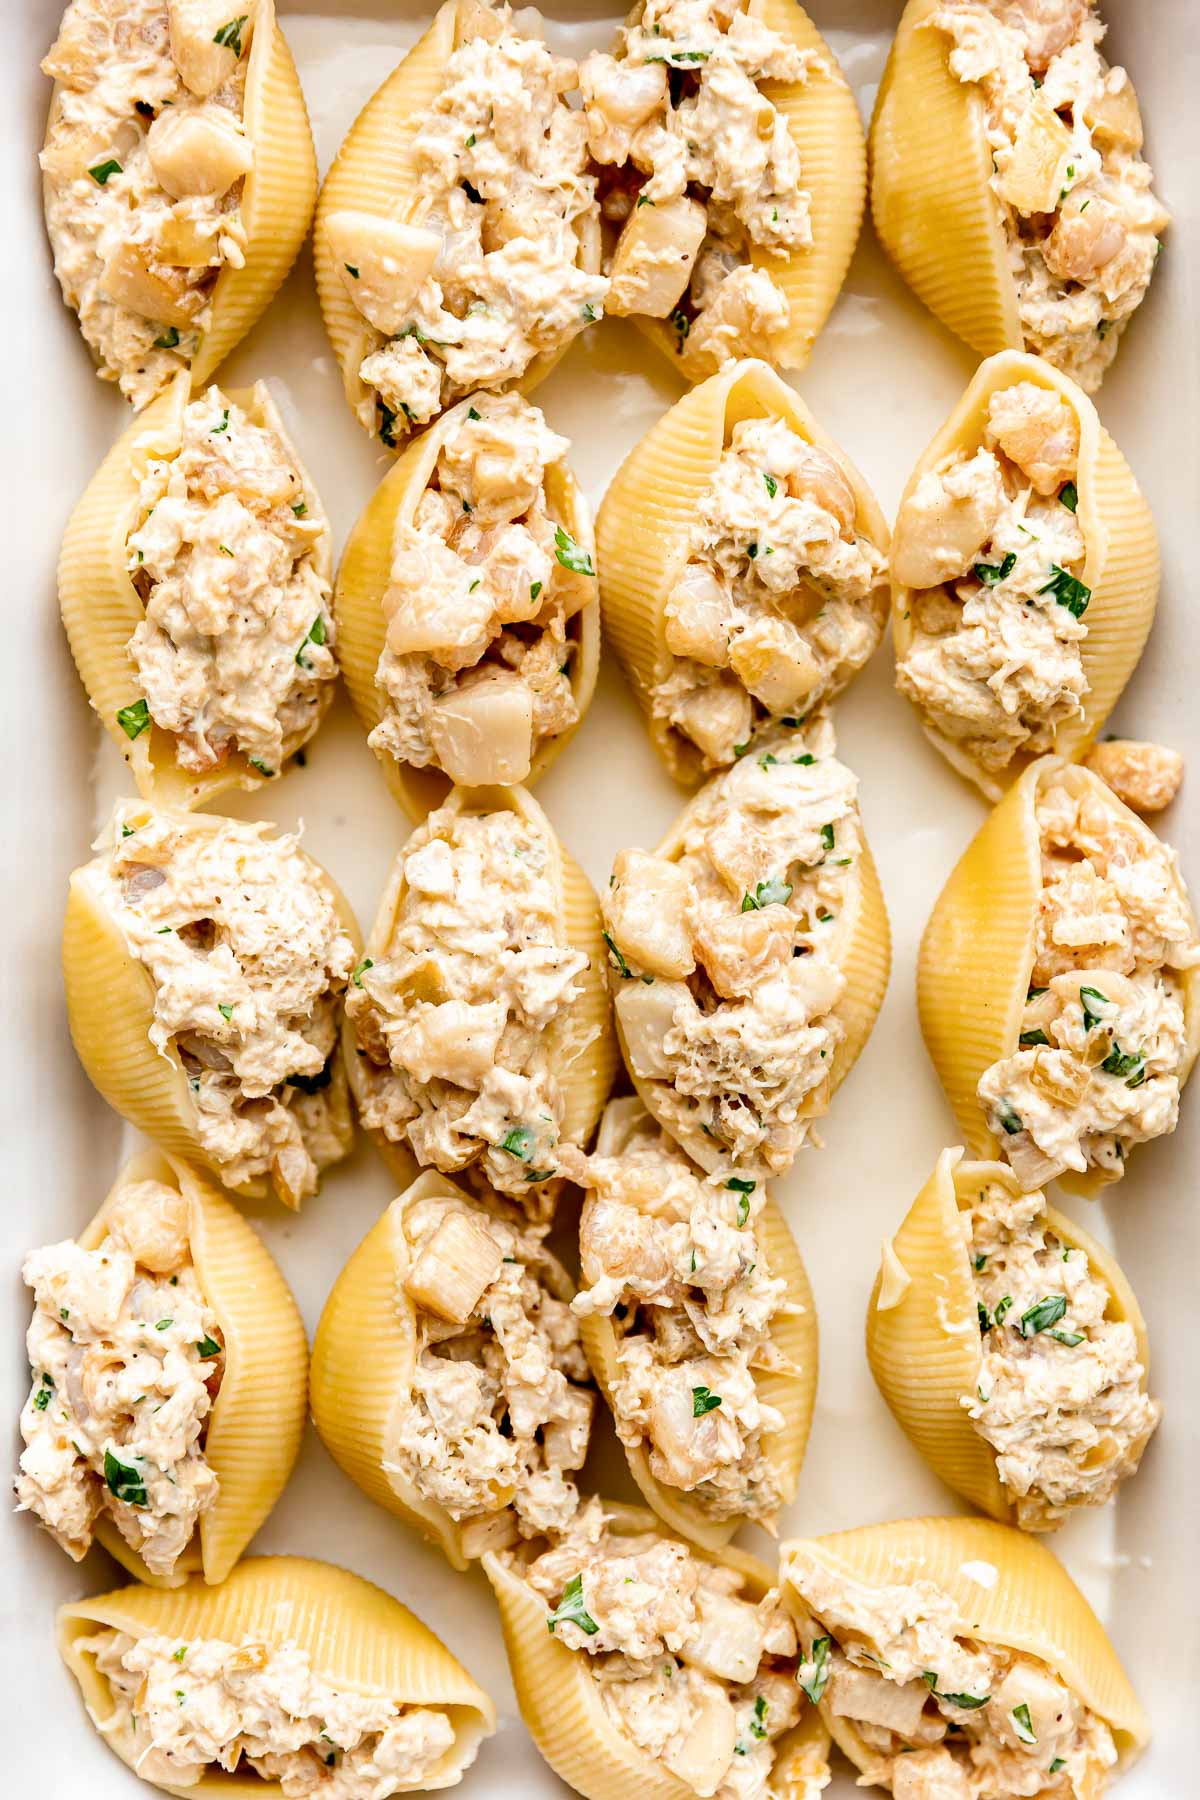 Assembled seafood stuffed shells fill a baking dish atop a layer of seafood béchamel sauce. The stuffed seafood shells have been positioned such that the seafood is facing upwards.